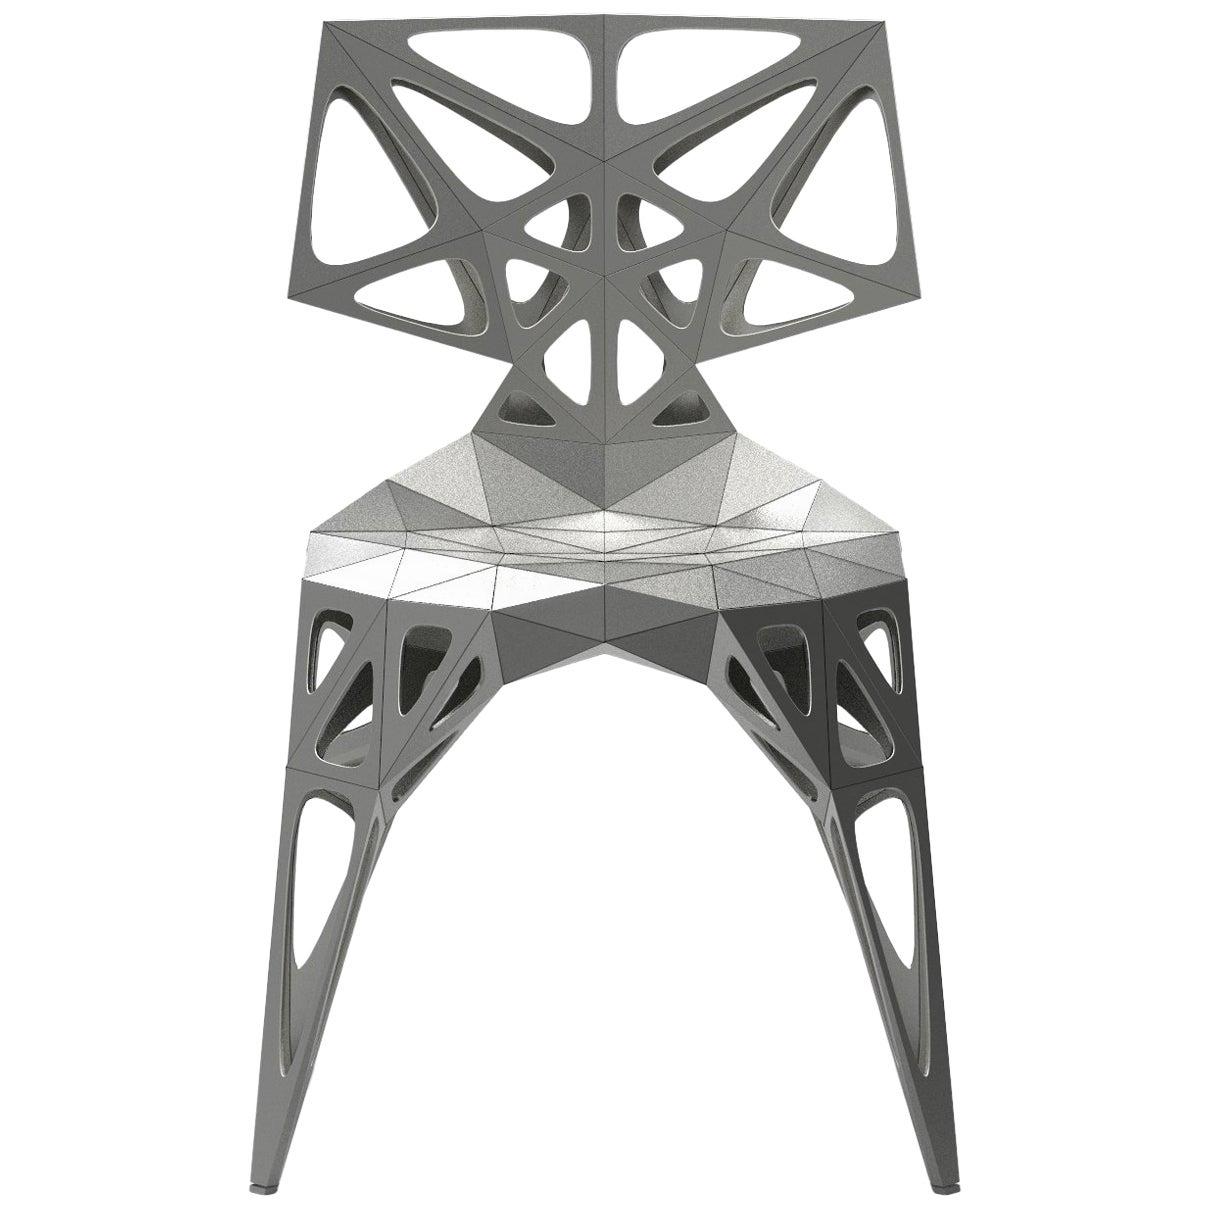 MC06 Endless Form Chair Series Stainless Steel Customizable Black&Sliver Outdoor For Sale